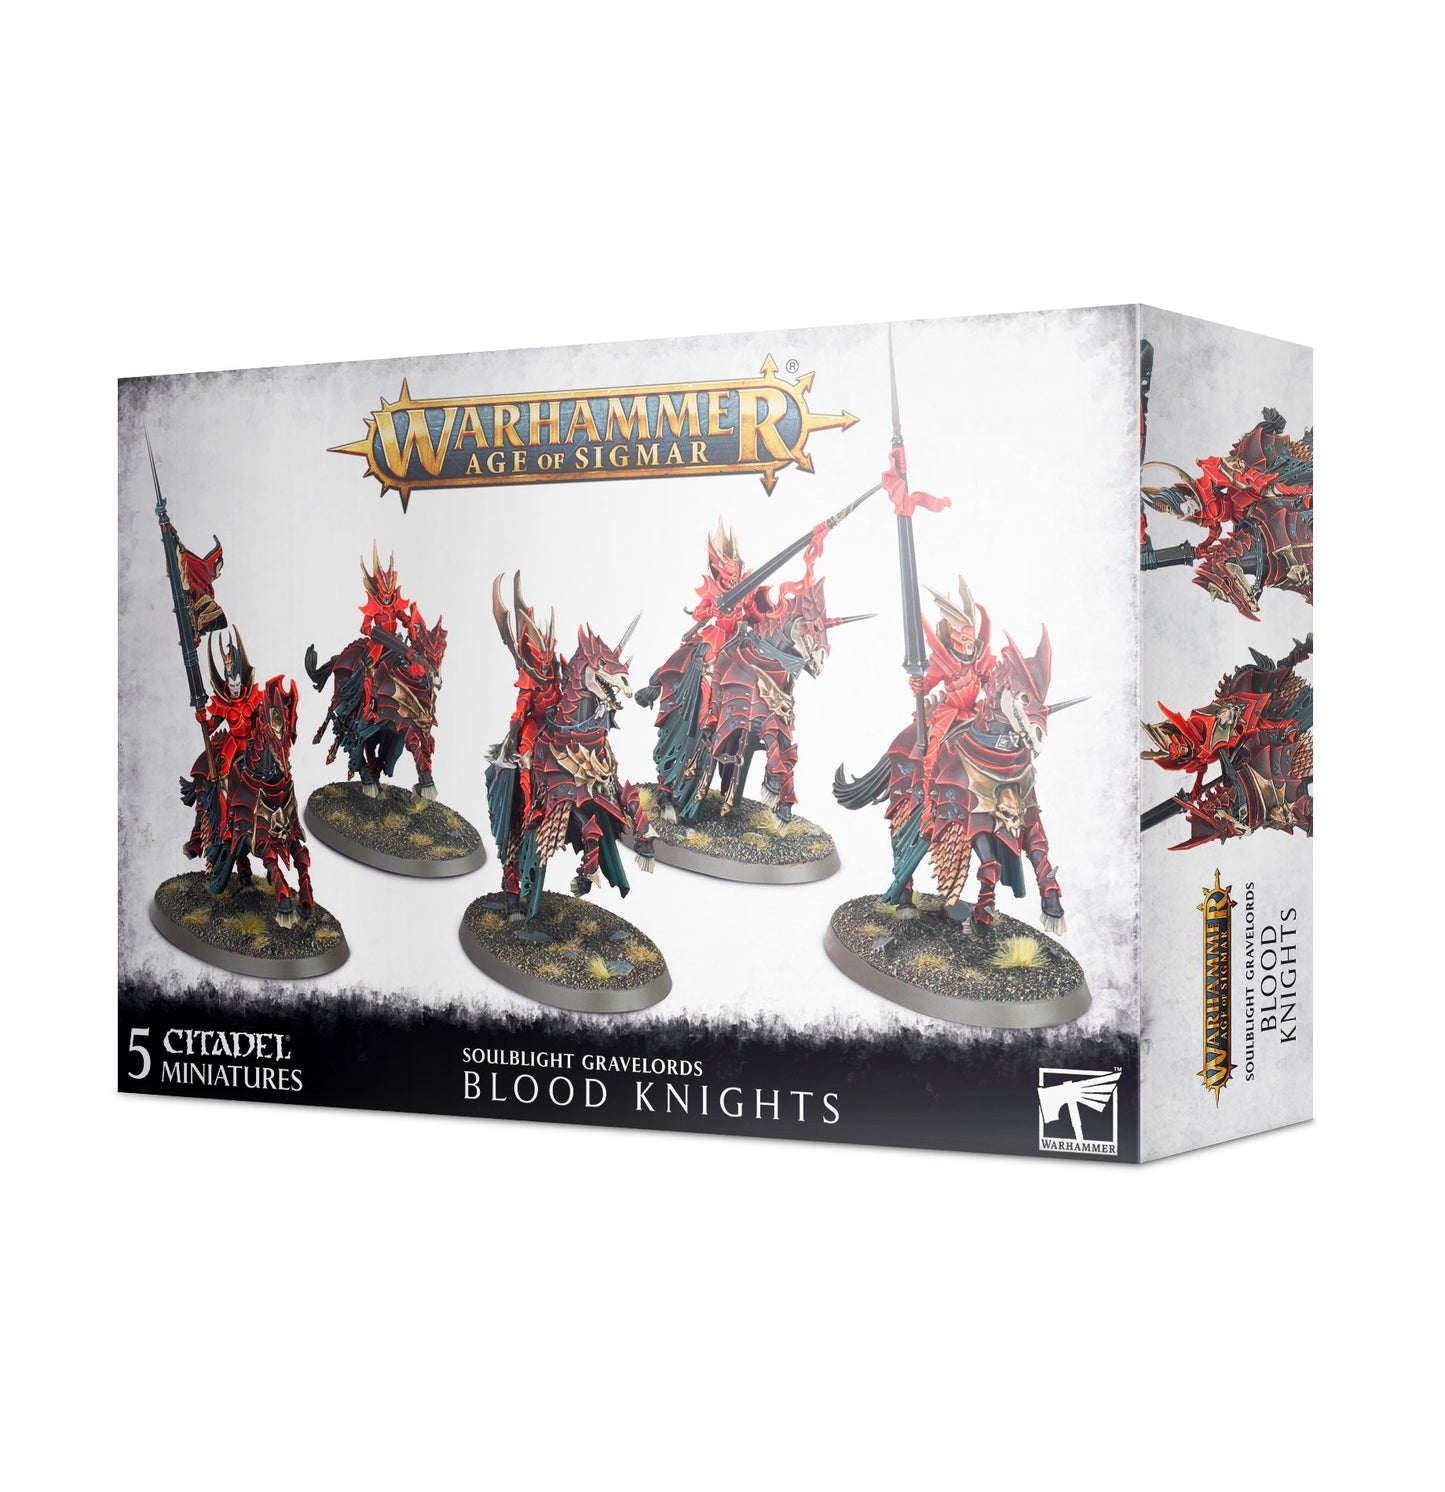 Warhammer Age of Sigmar: Soulbrlight Gravelords Blood Knights